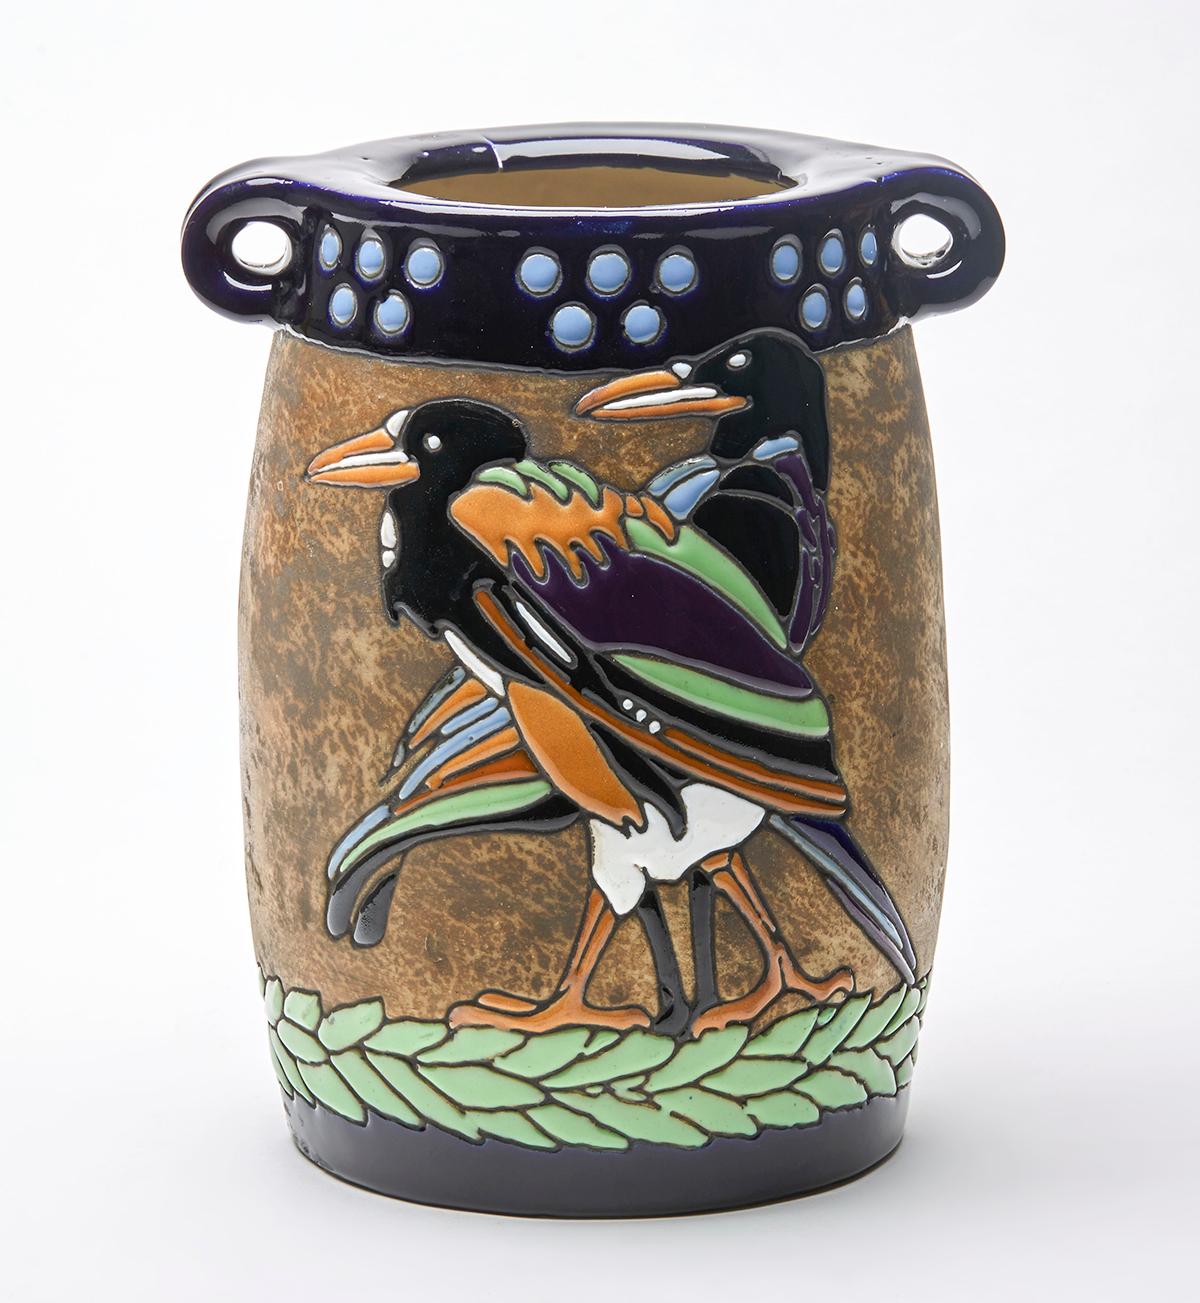 A large and impressive Art Nouveau/Jugendstil Austrian Imperial Amphora art pottery twin handled vase with tube lined bird designs dating from the early 20th century. 

In addition to Reissner, Stellmacher, and Kessel marked works, there were a